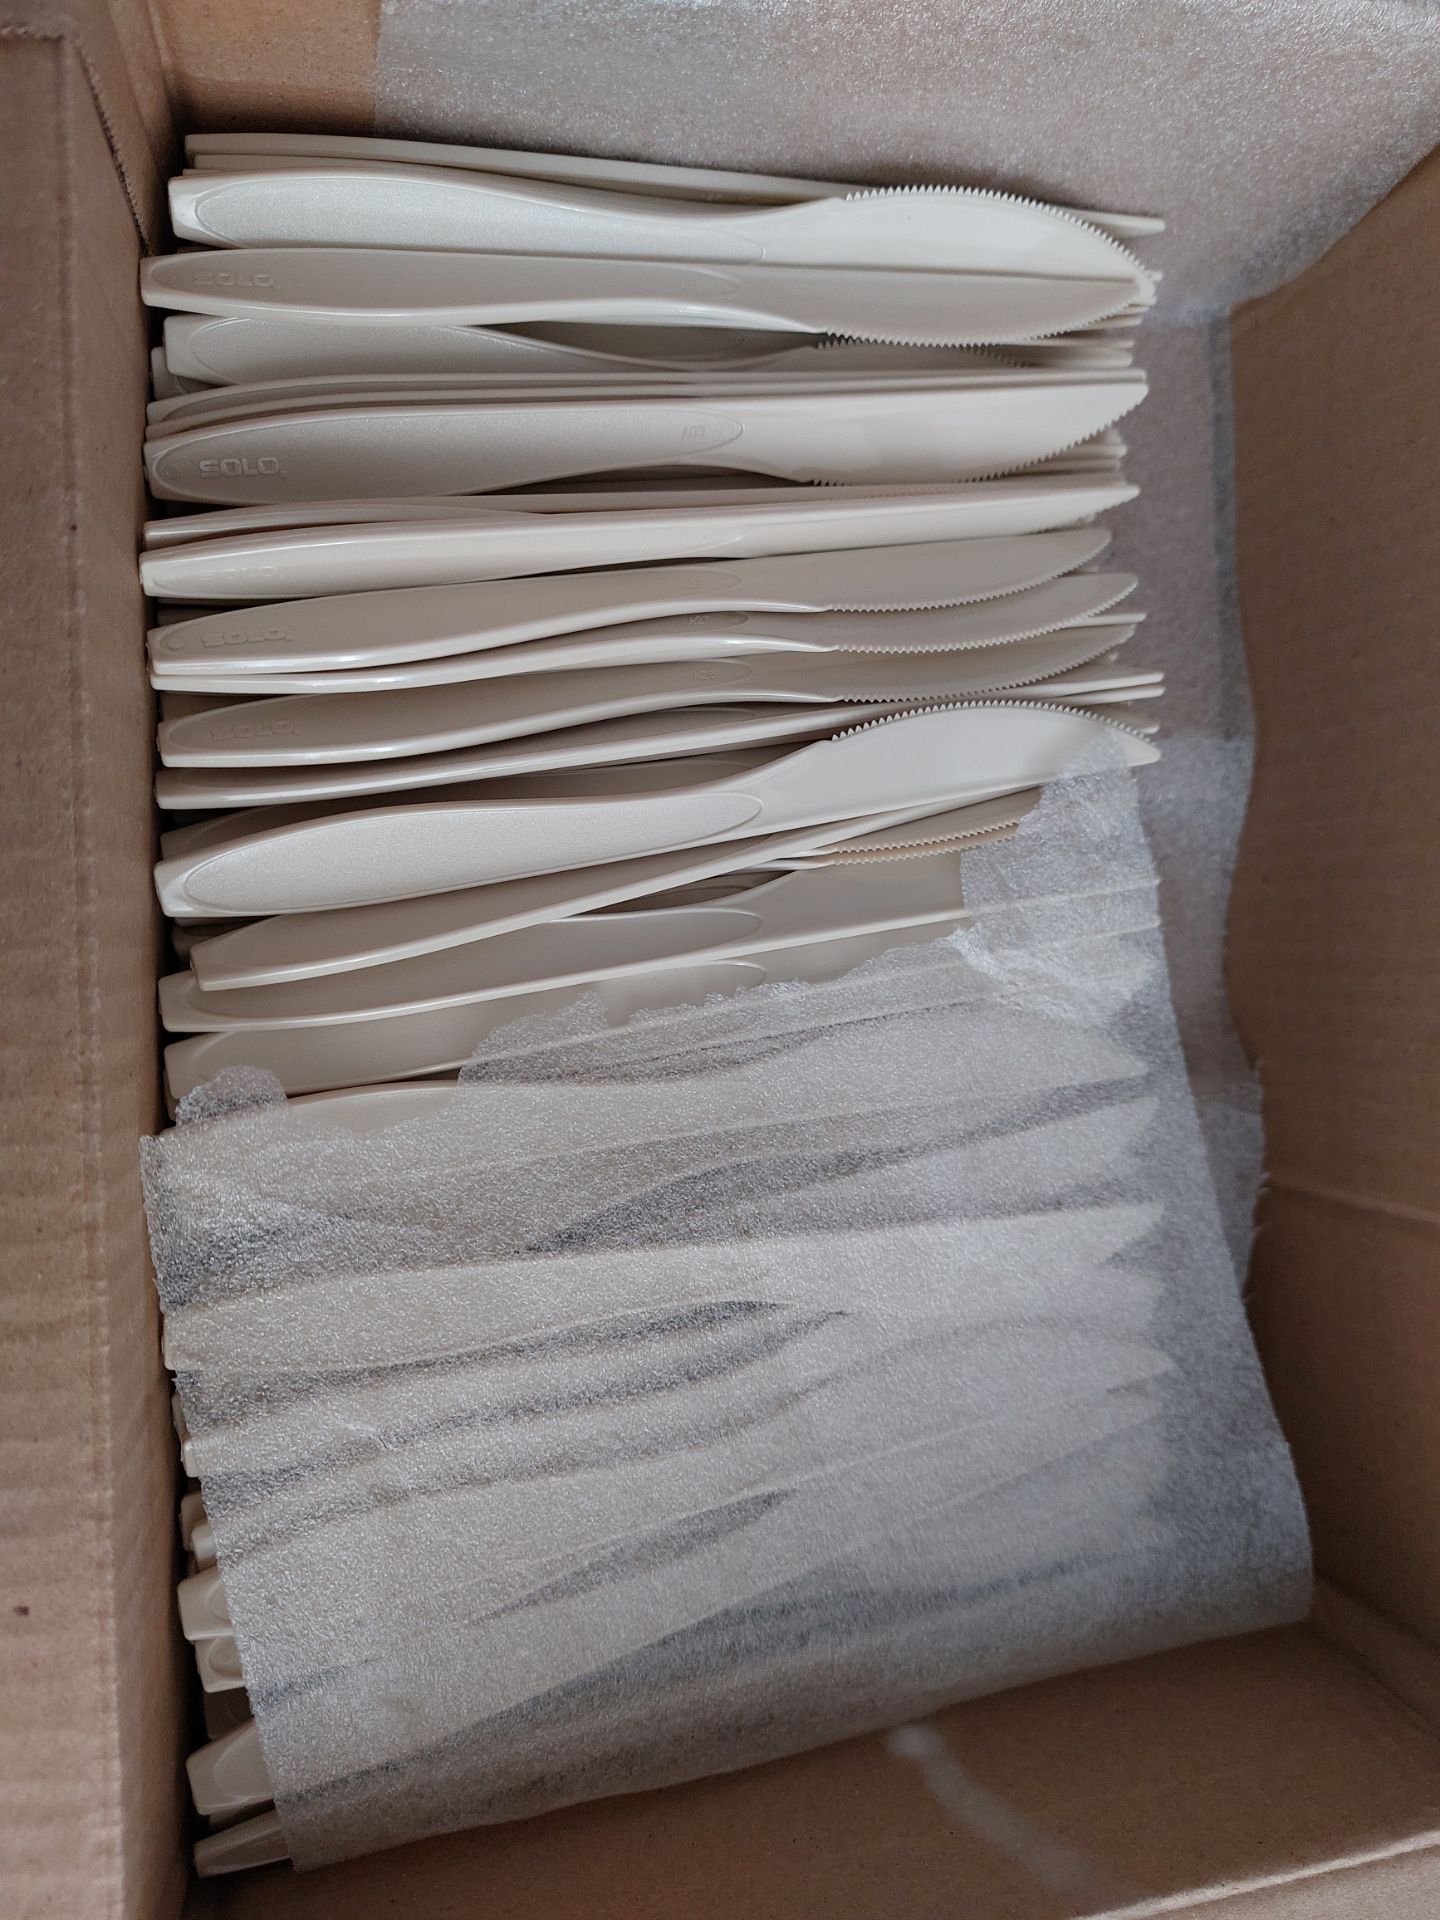 200 Plastic Knives In Plastic, Champagne Colour - Image 3 of 3